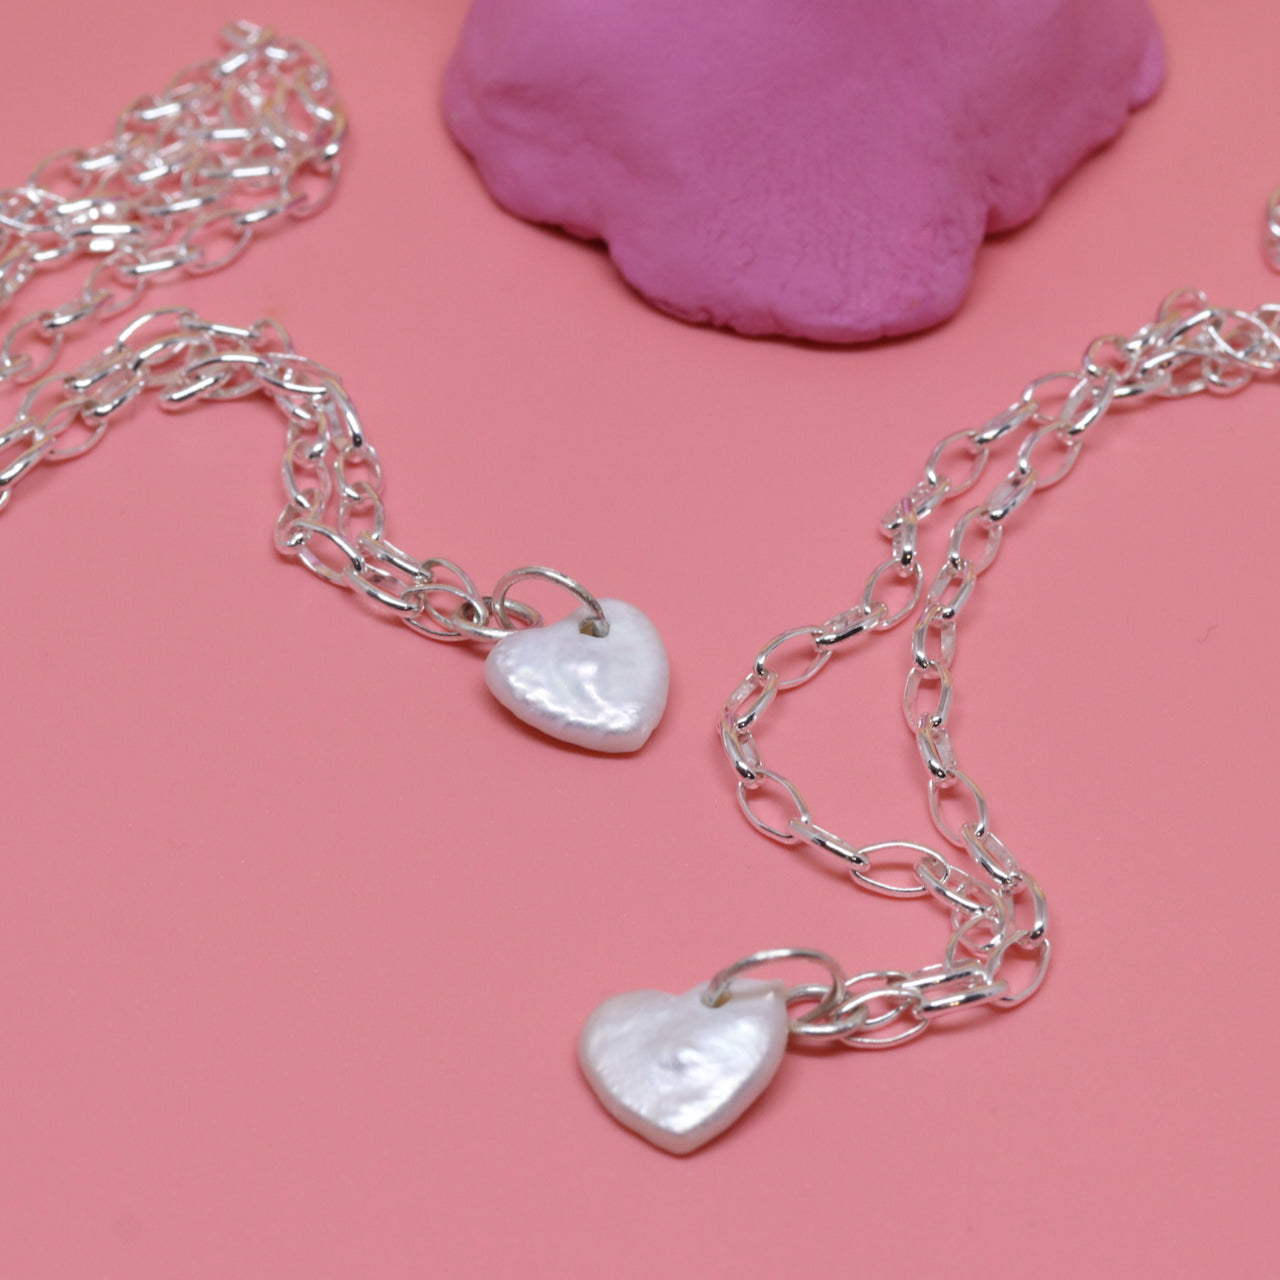 Pearl Heart Silver Necklace. Jewellery made by Fruit Bowl Studio Wānaka